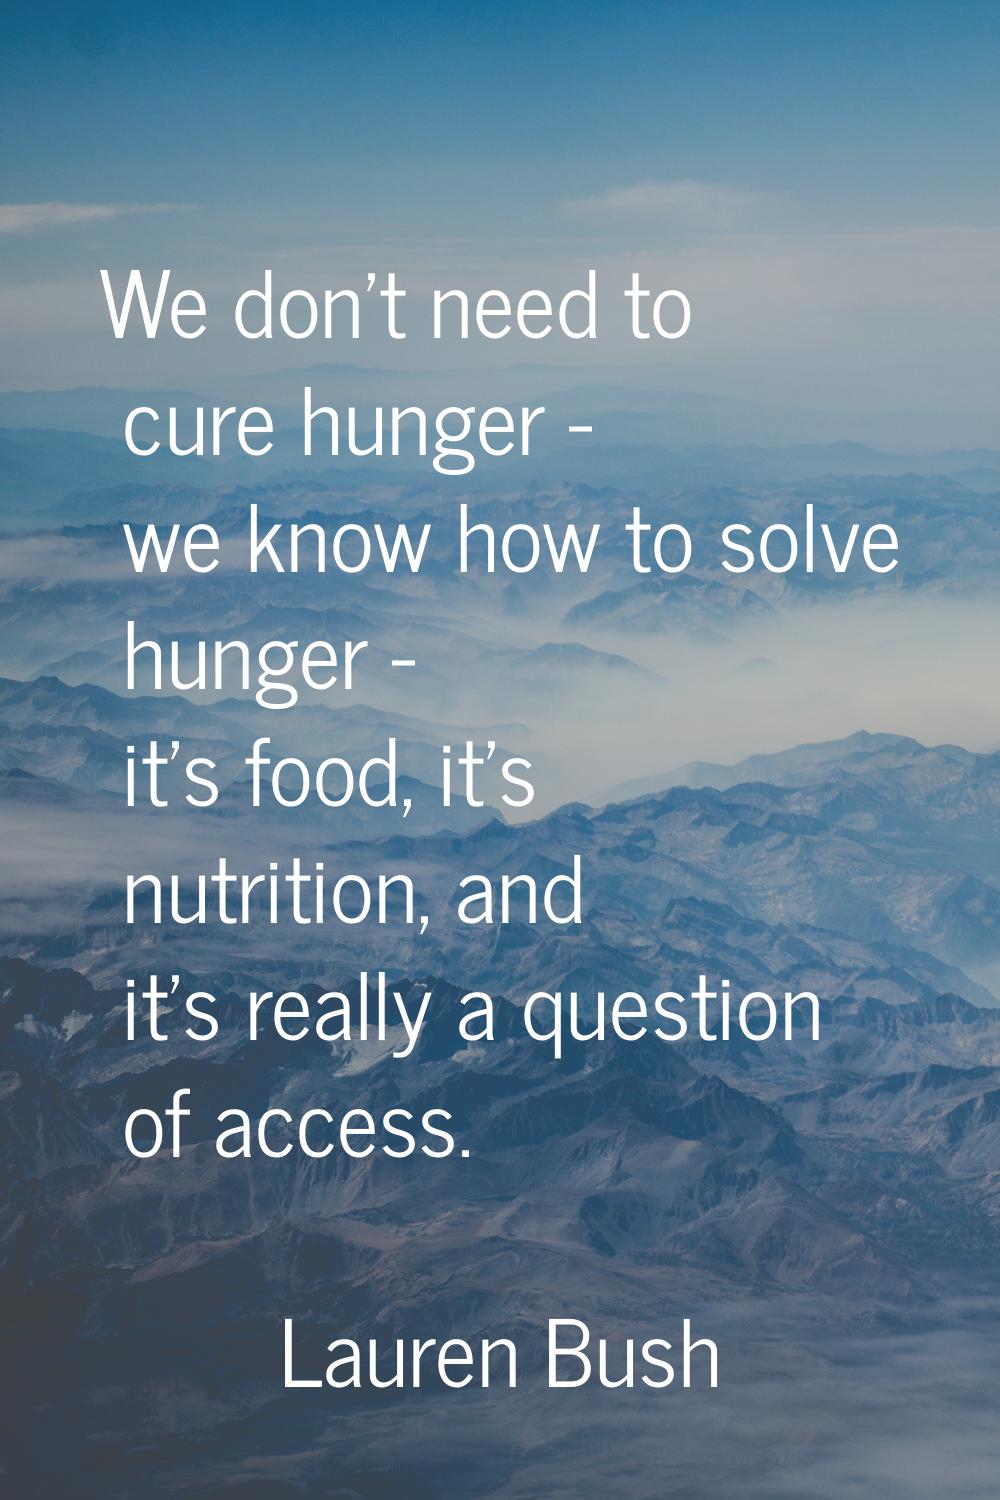 We don't need to cure hunger - we know how to solve hunger - it's food, it's nutrition, and it's re